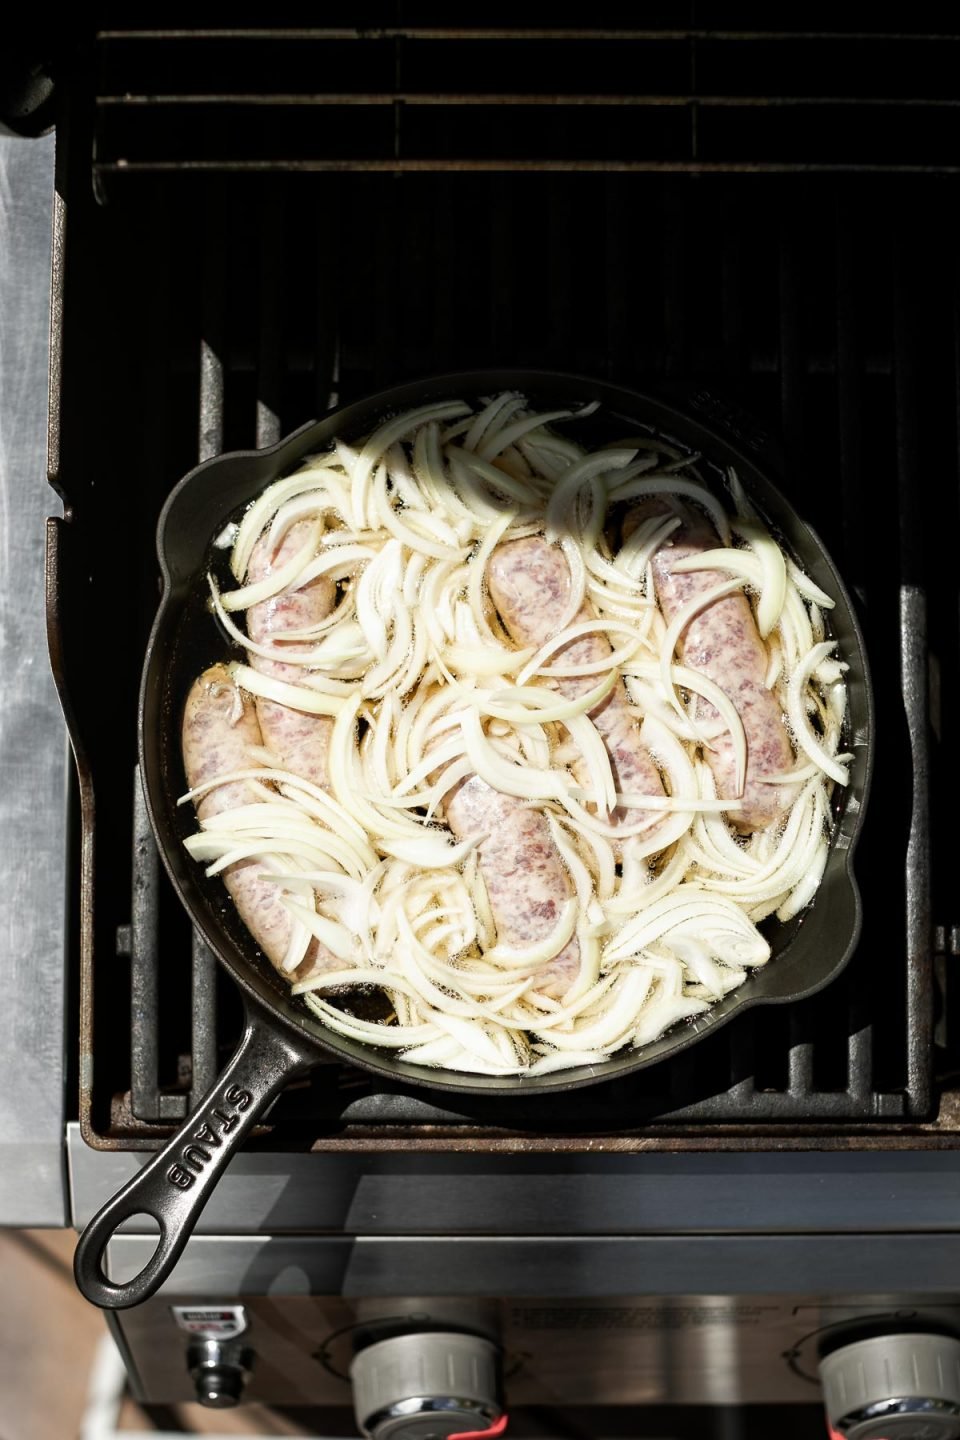 Brats, sliced onion, & beer in a large black cast iron skillet placed on the grill grates.